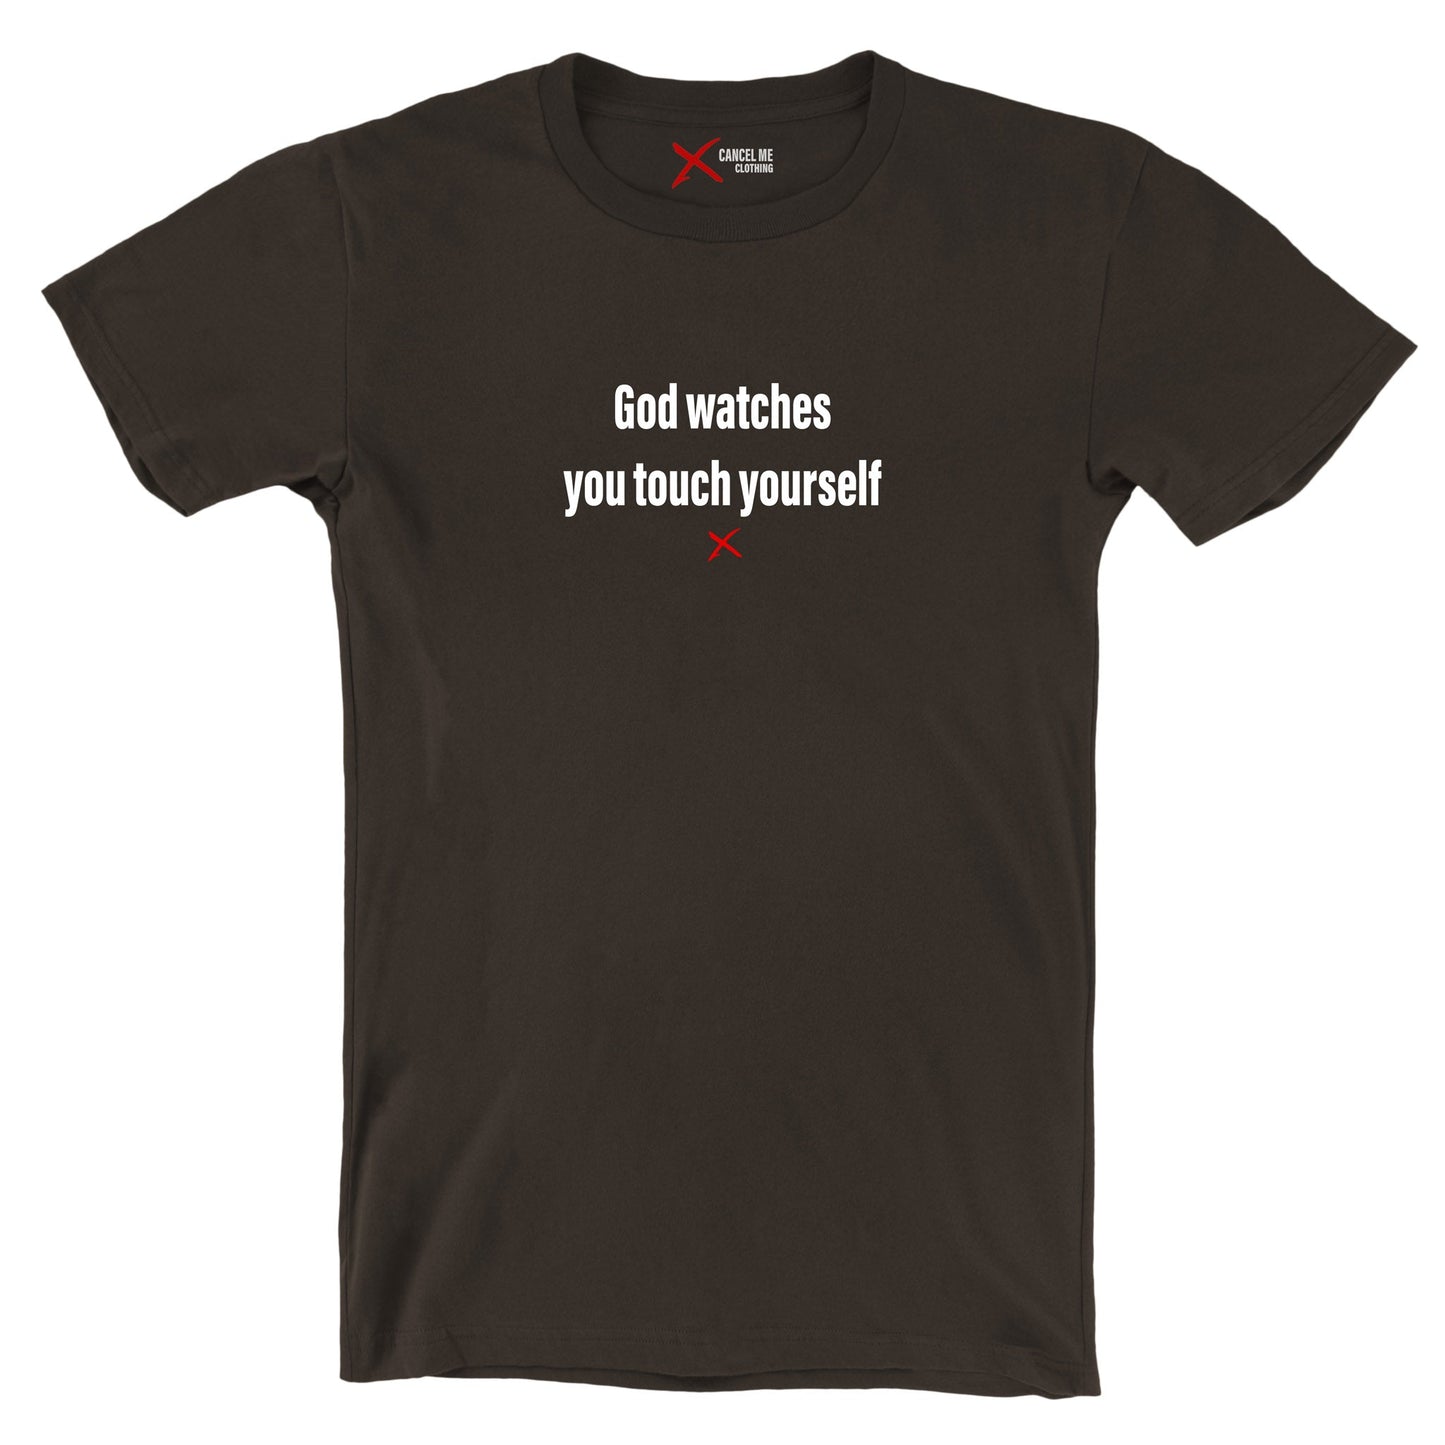 God watches you touch yourself - Shirt